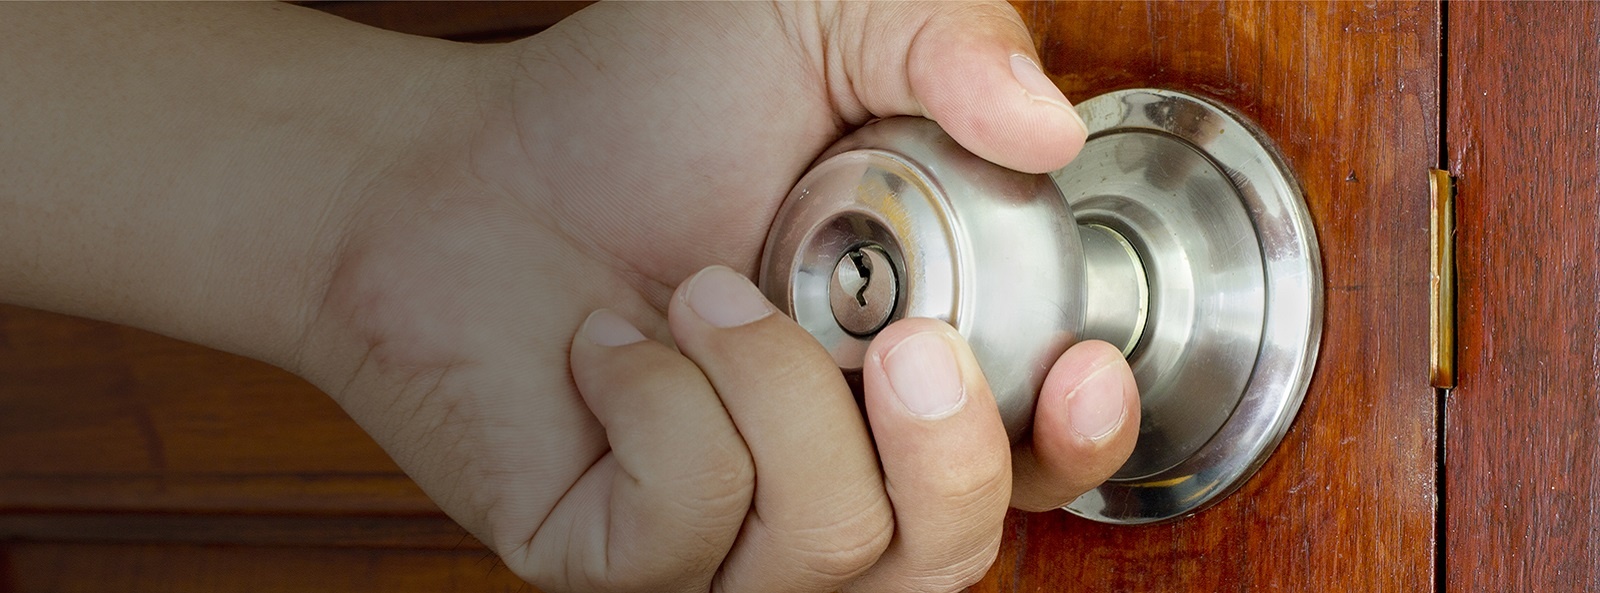 High Security Lock Systems Toronto